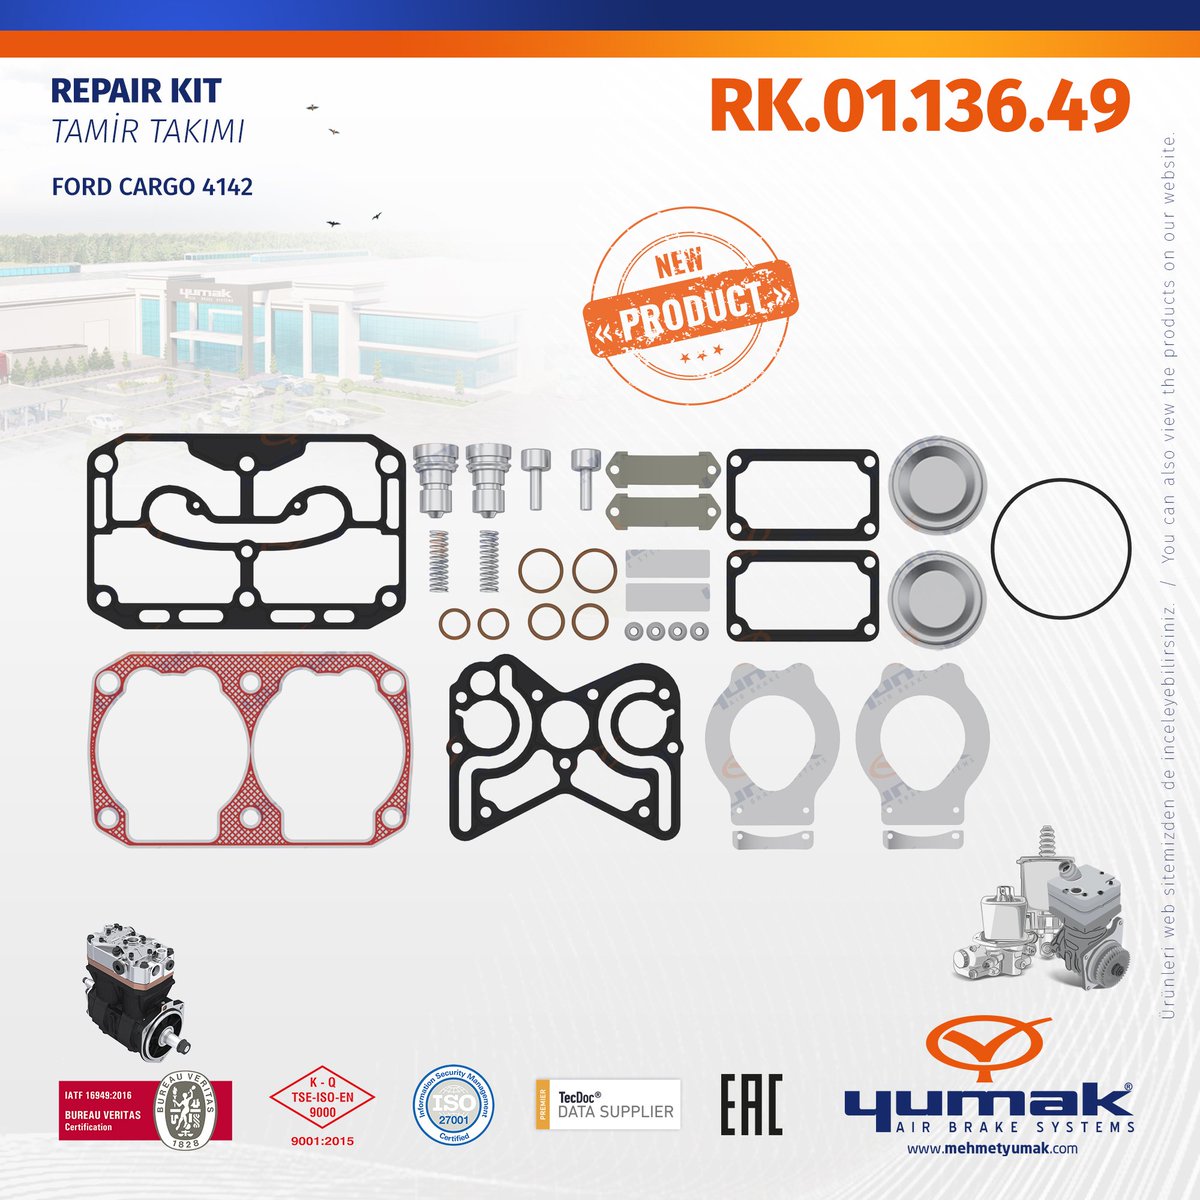 NEW PRODUCT! 01.04.068 Twin Cylinder Compressor - RK.01.677.50 Complete Cylinder Head - RK.01.676.10 Valve Plate Kit -- RK.01.136.49 Repair Kit